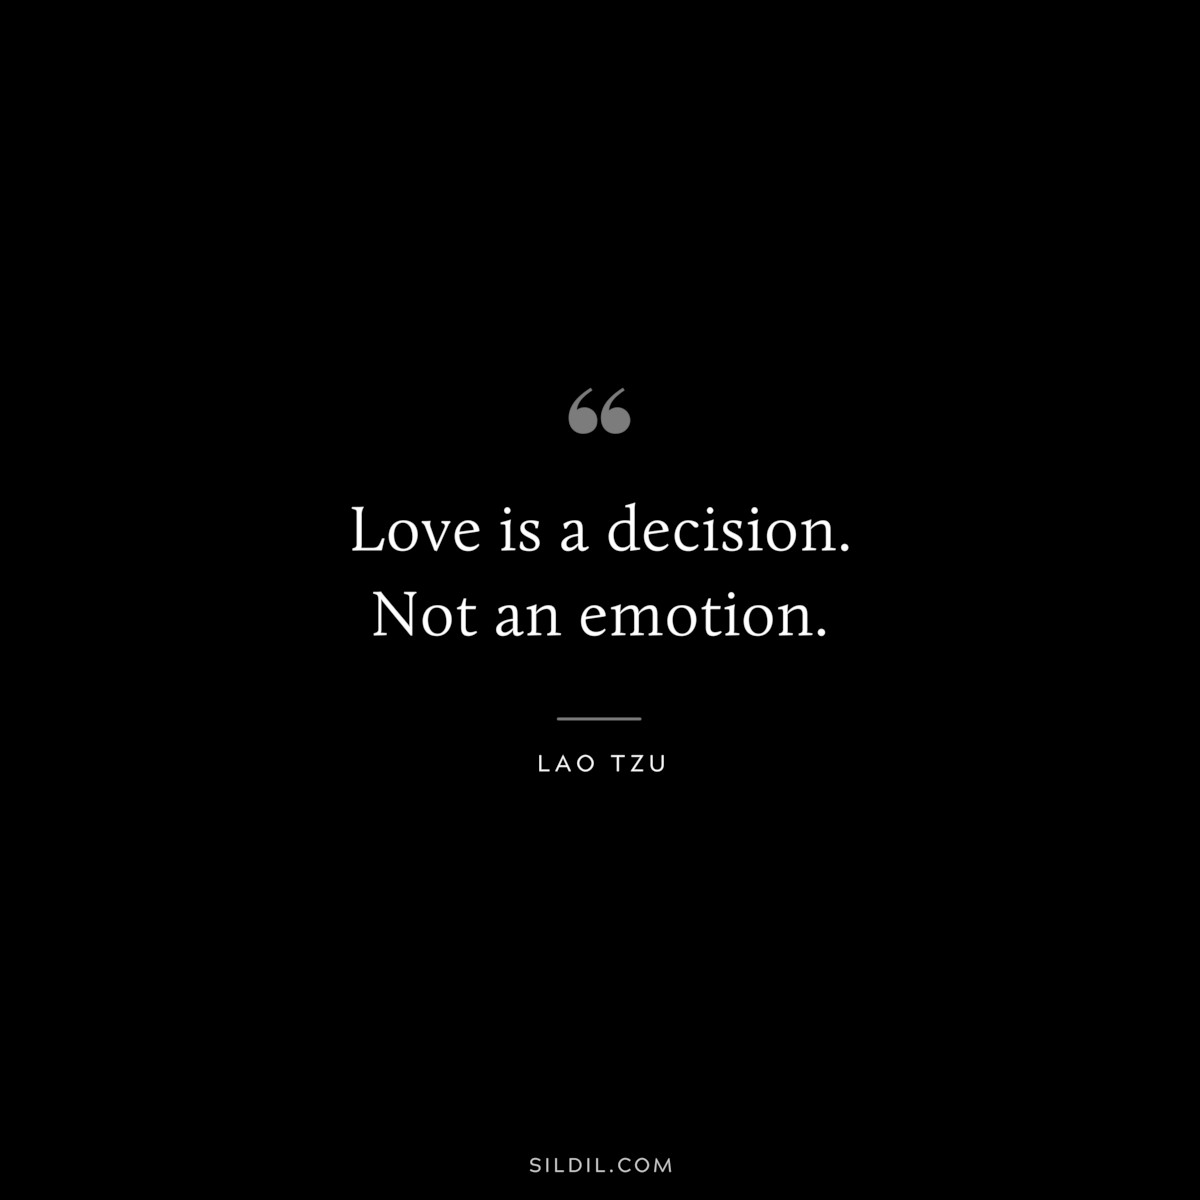 Love is a decision. Not an emotion. ― Lao Tzu